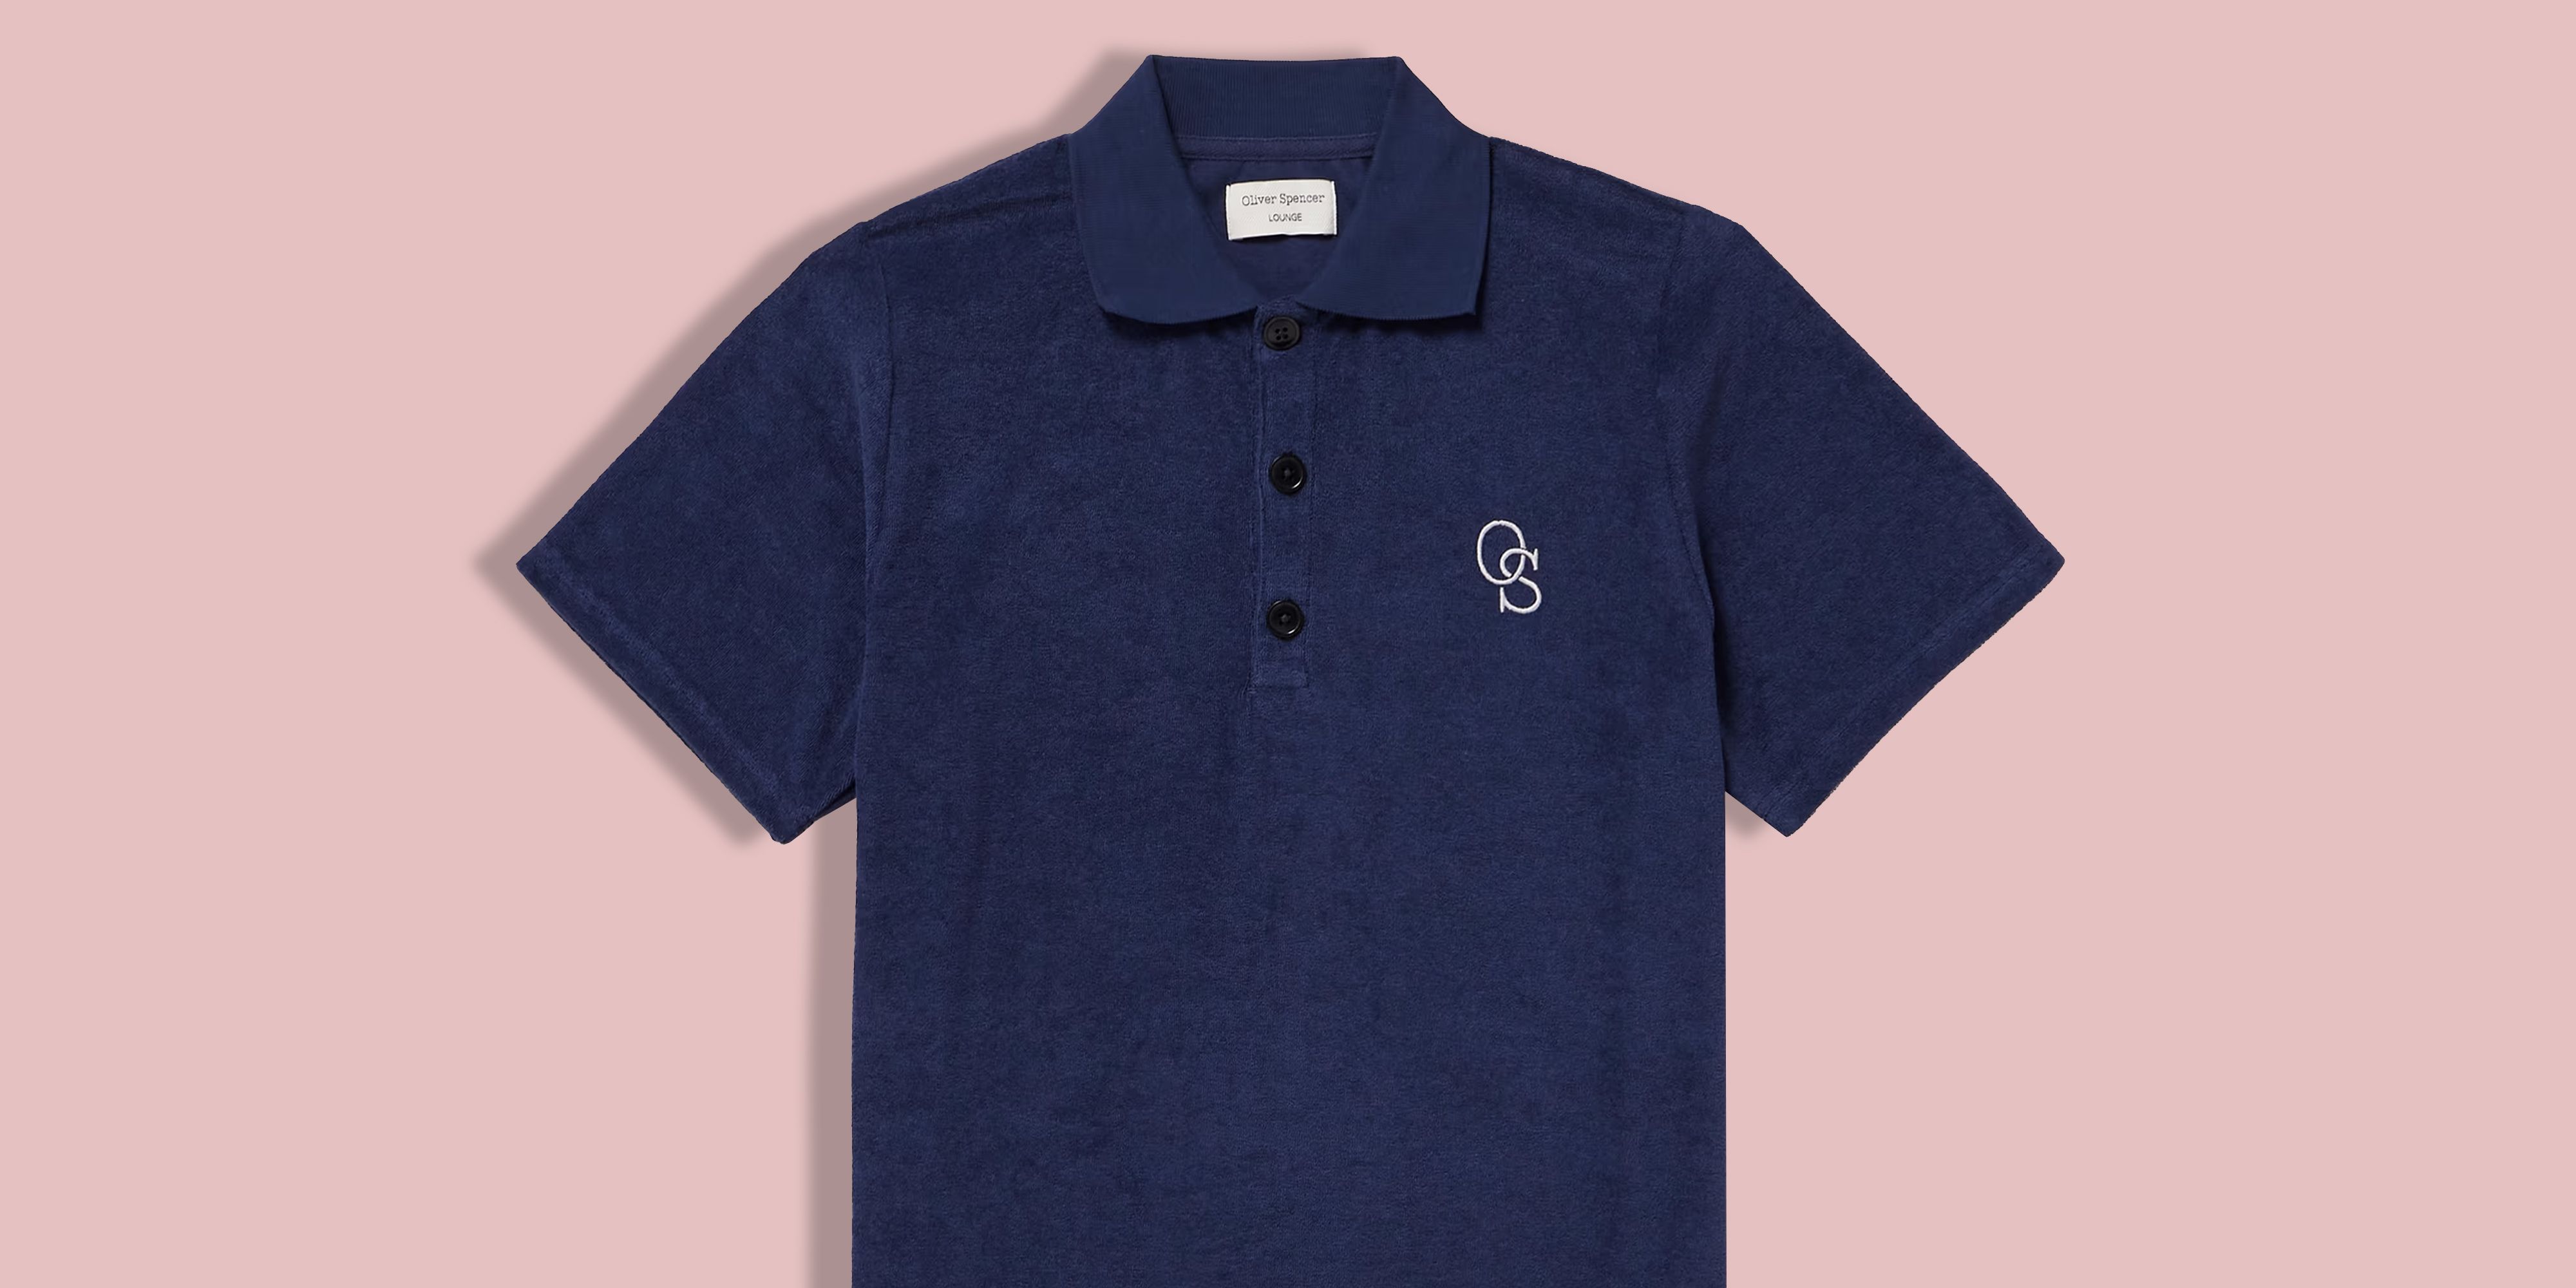 The Best Golf Shirts For Men - The Do's And Don'ts Of Polos